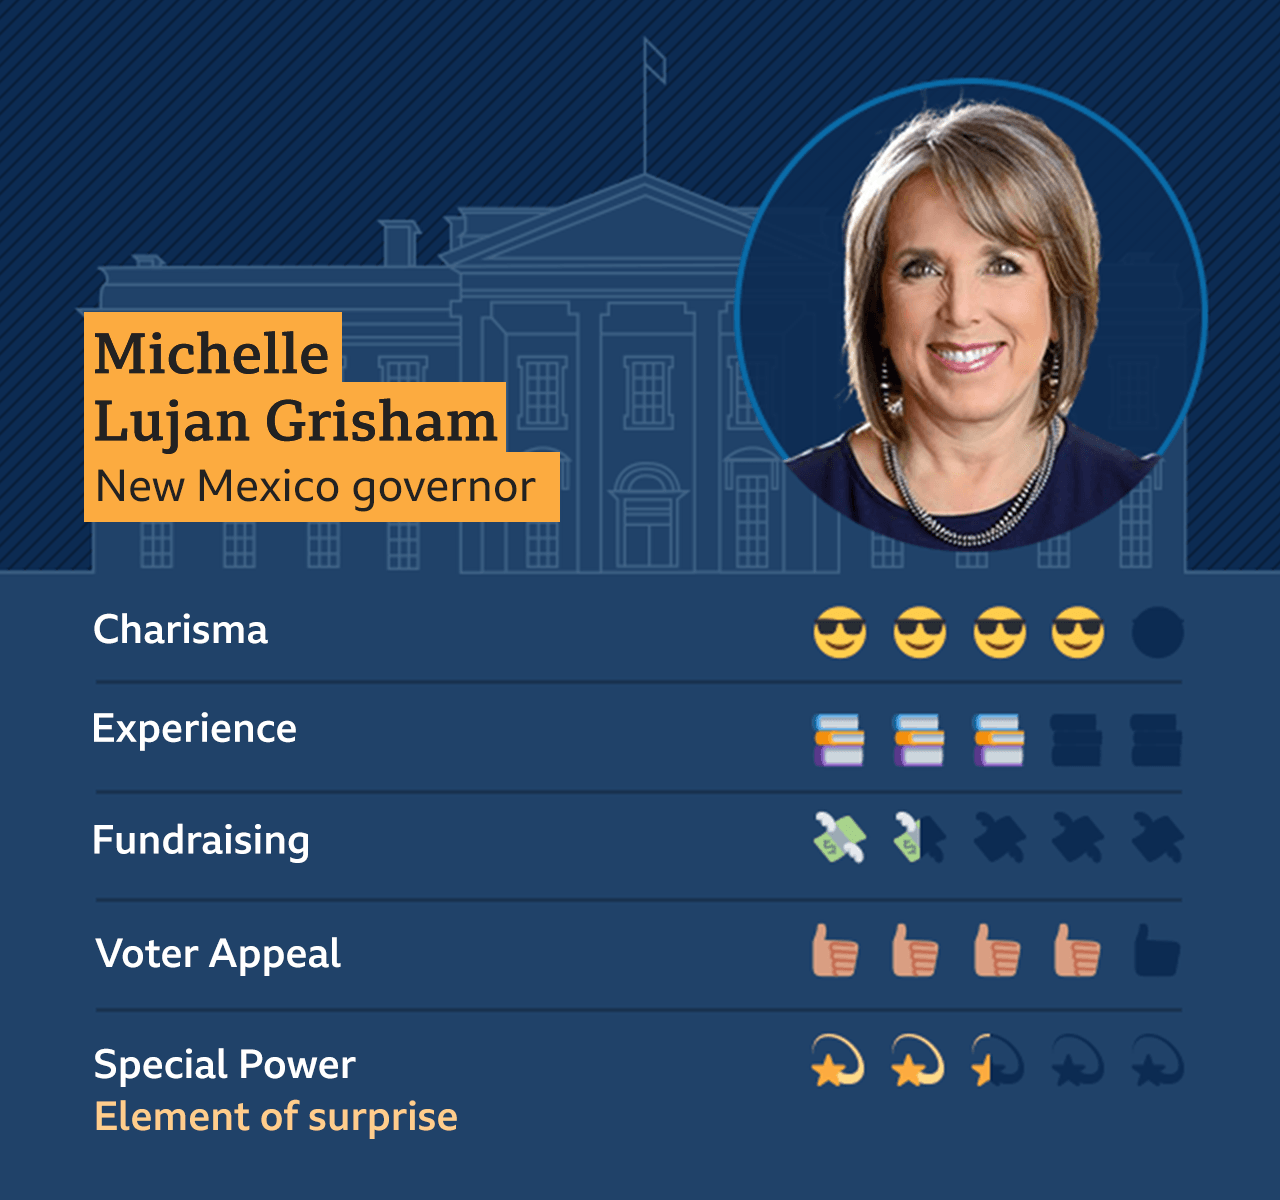 Graphic of Michelle Lujan Grisham, New Mexico governor: Charisma - 4, Experience - 3, Fundraising - 1.5, Voter appeal - 4, Special Power - Element of surprise - 2.5